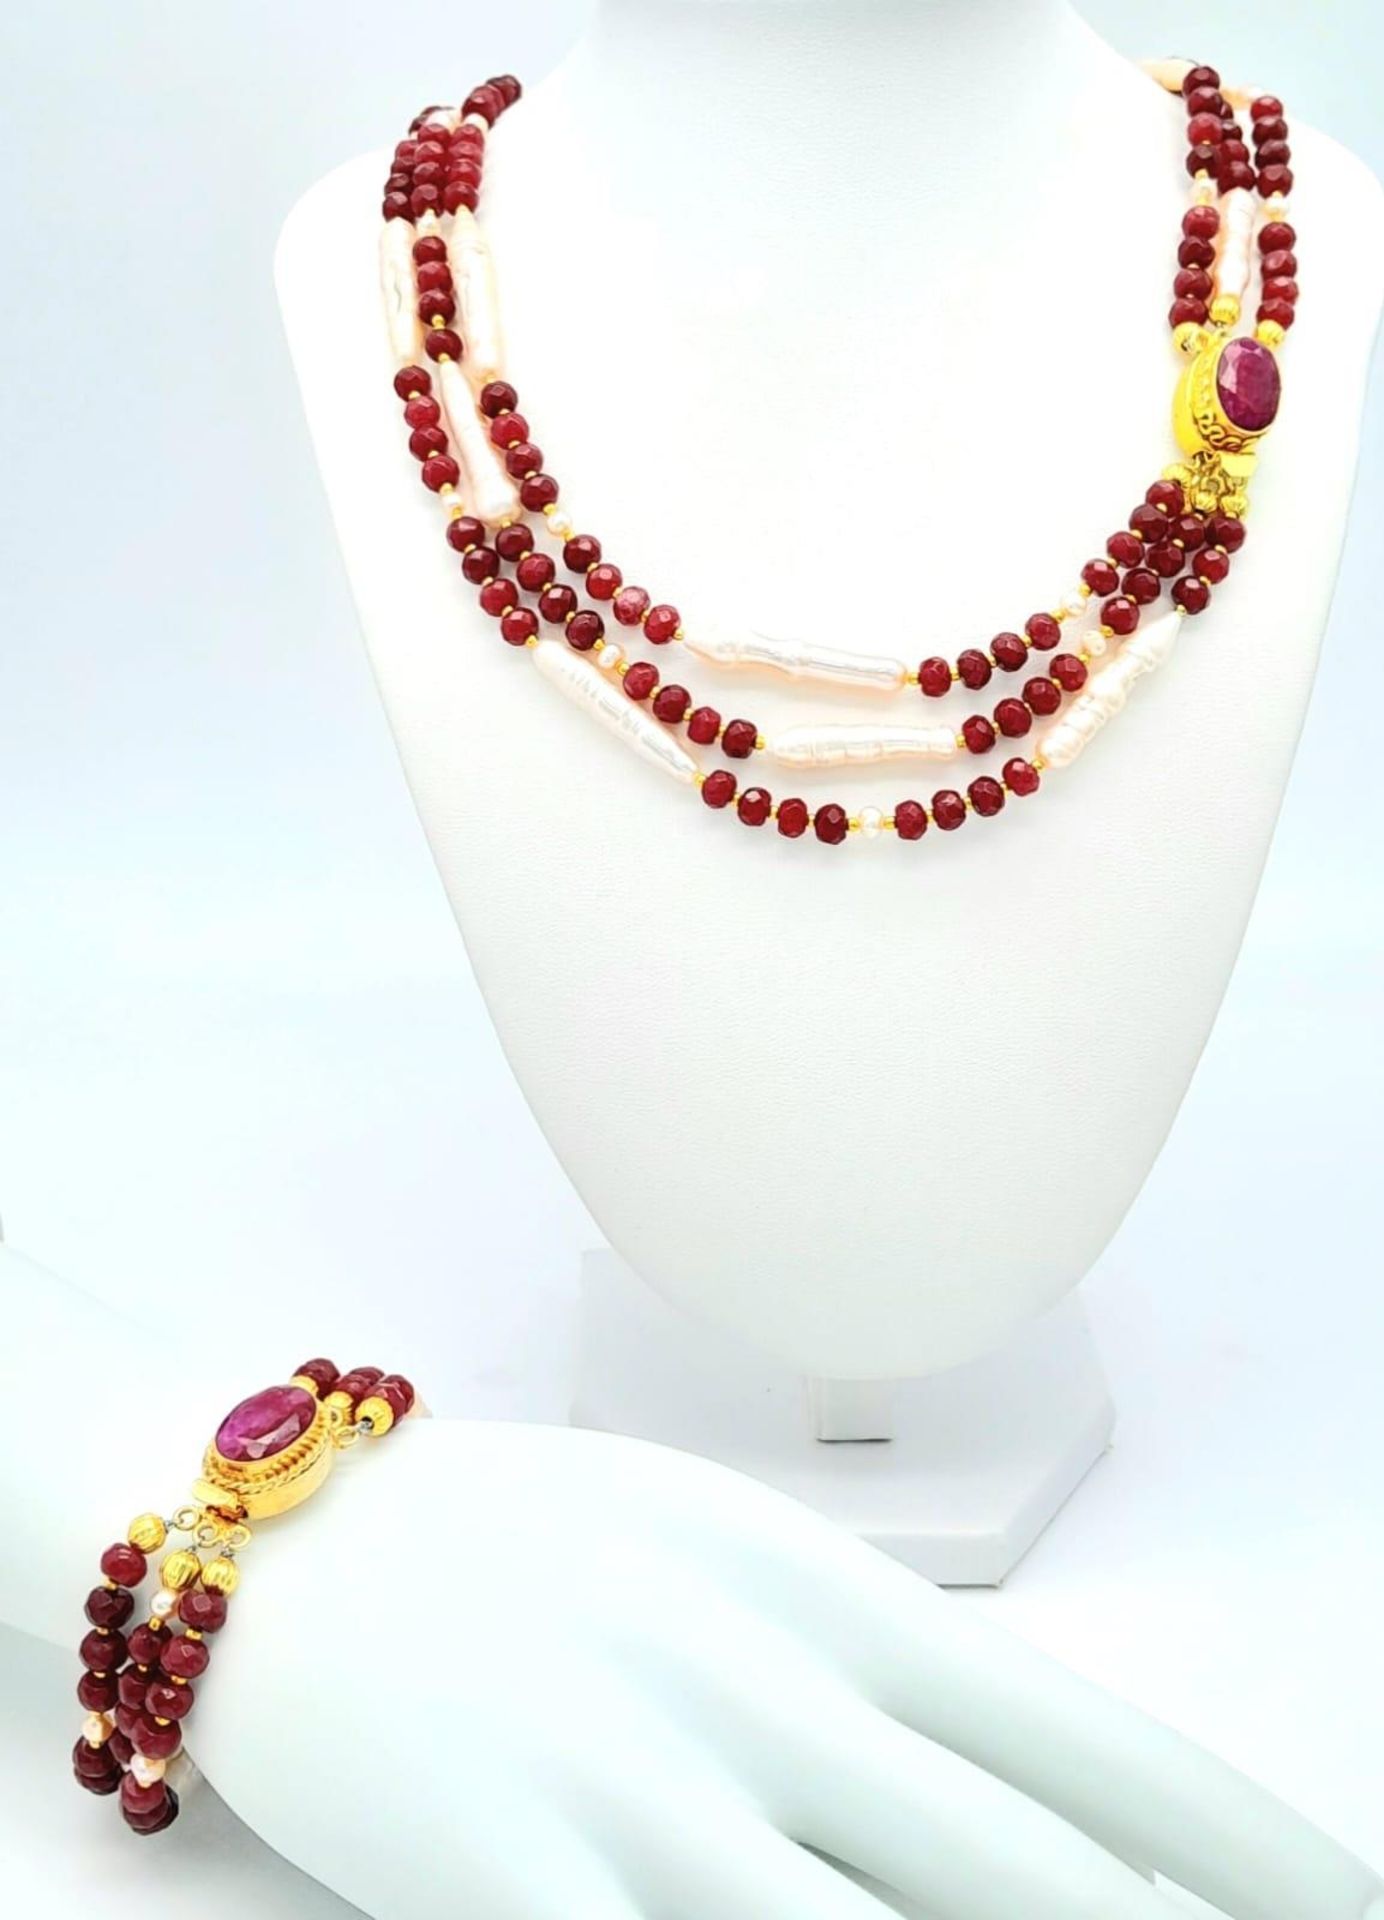 A very glamorous three row necklace and bracelet set with multi-faceted rubies and large, pink,